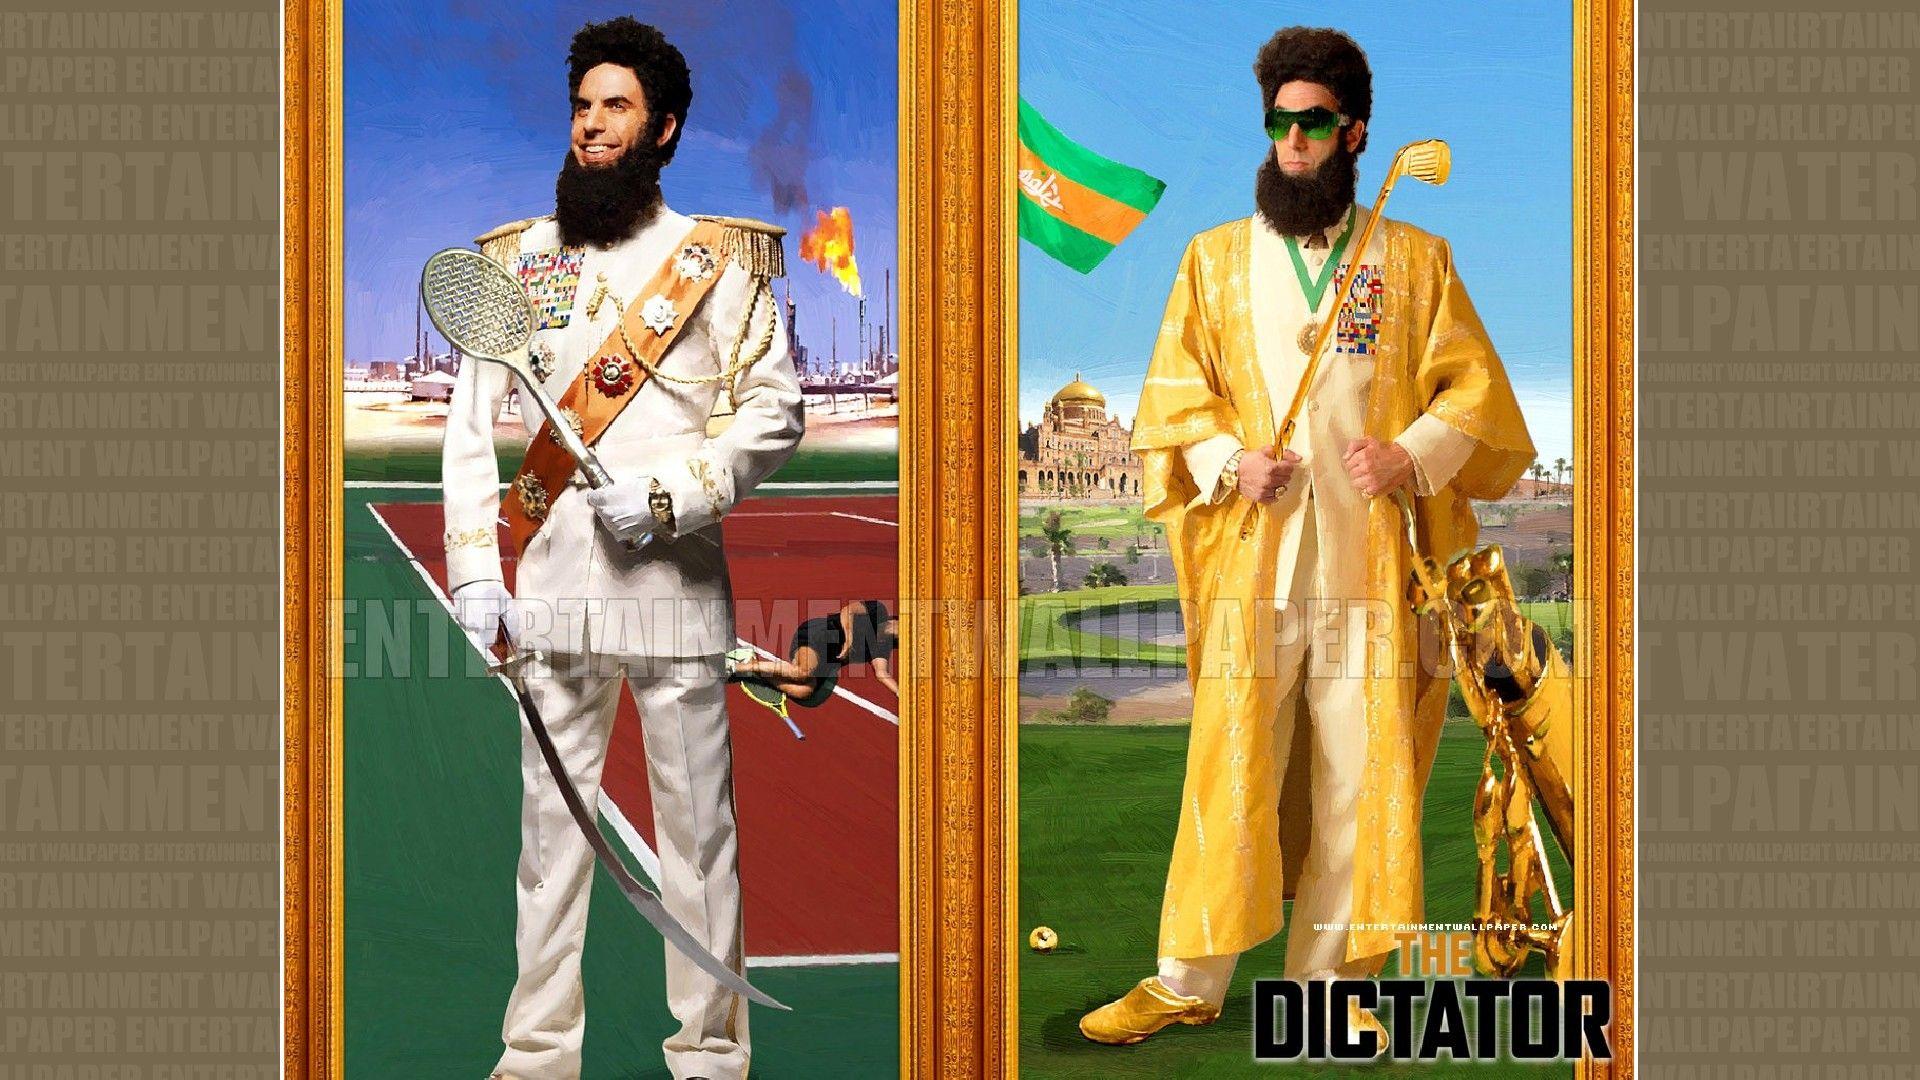 The Dictator wallpaper 8 Dictator Image, Picture, Photo